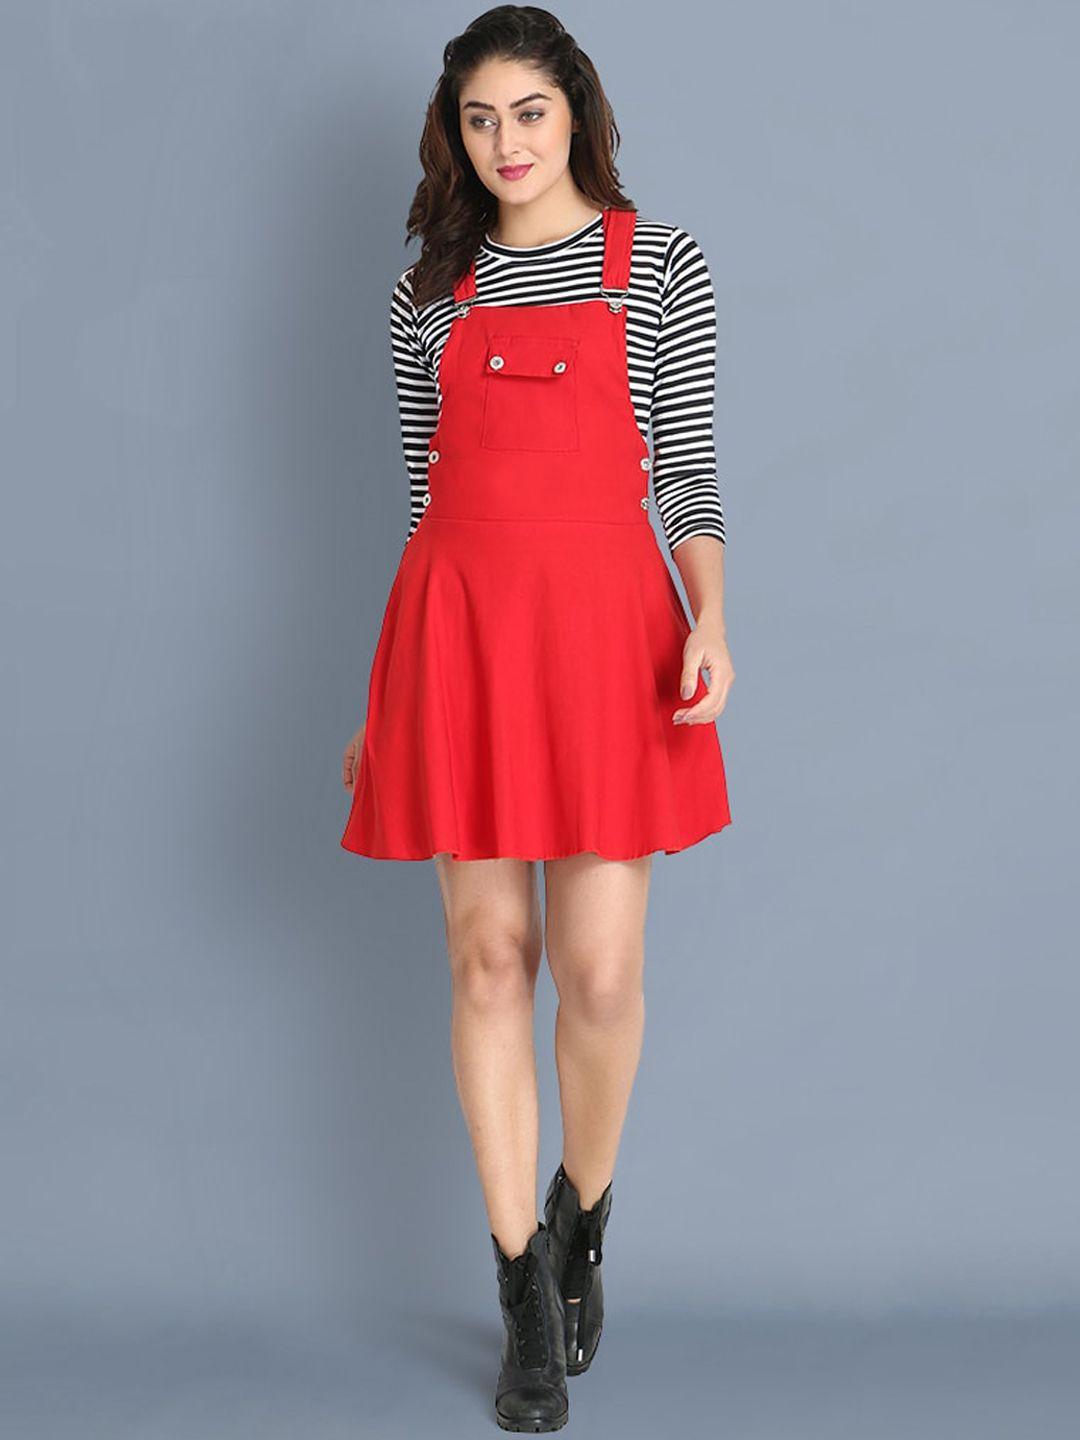 buy-new-trend-women-red-&-white-solid-cotton-dungaree-skirt-with-top